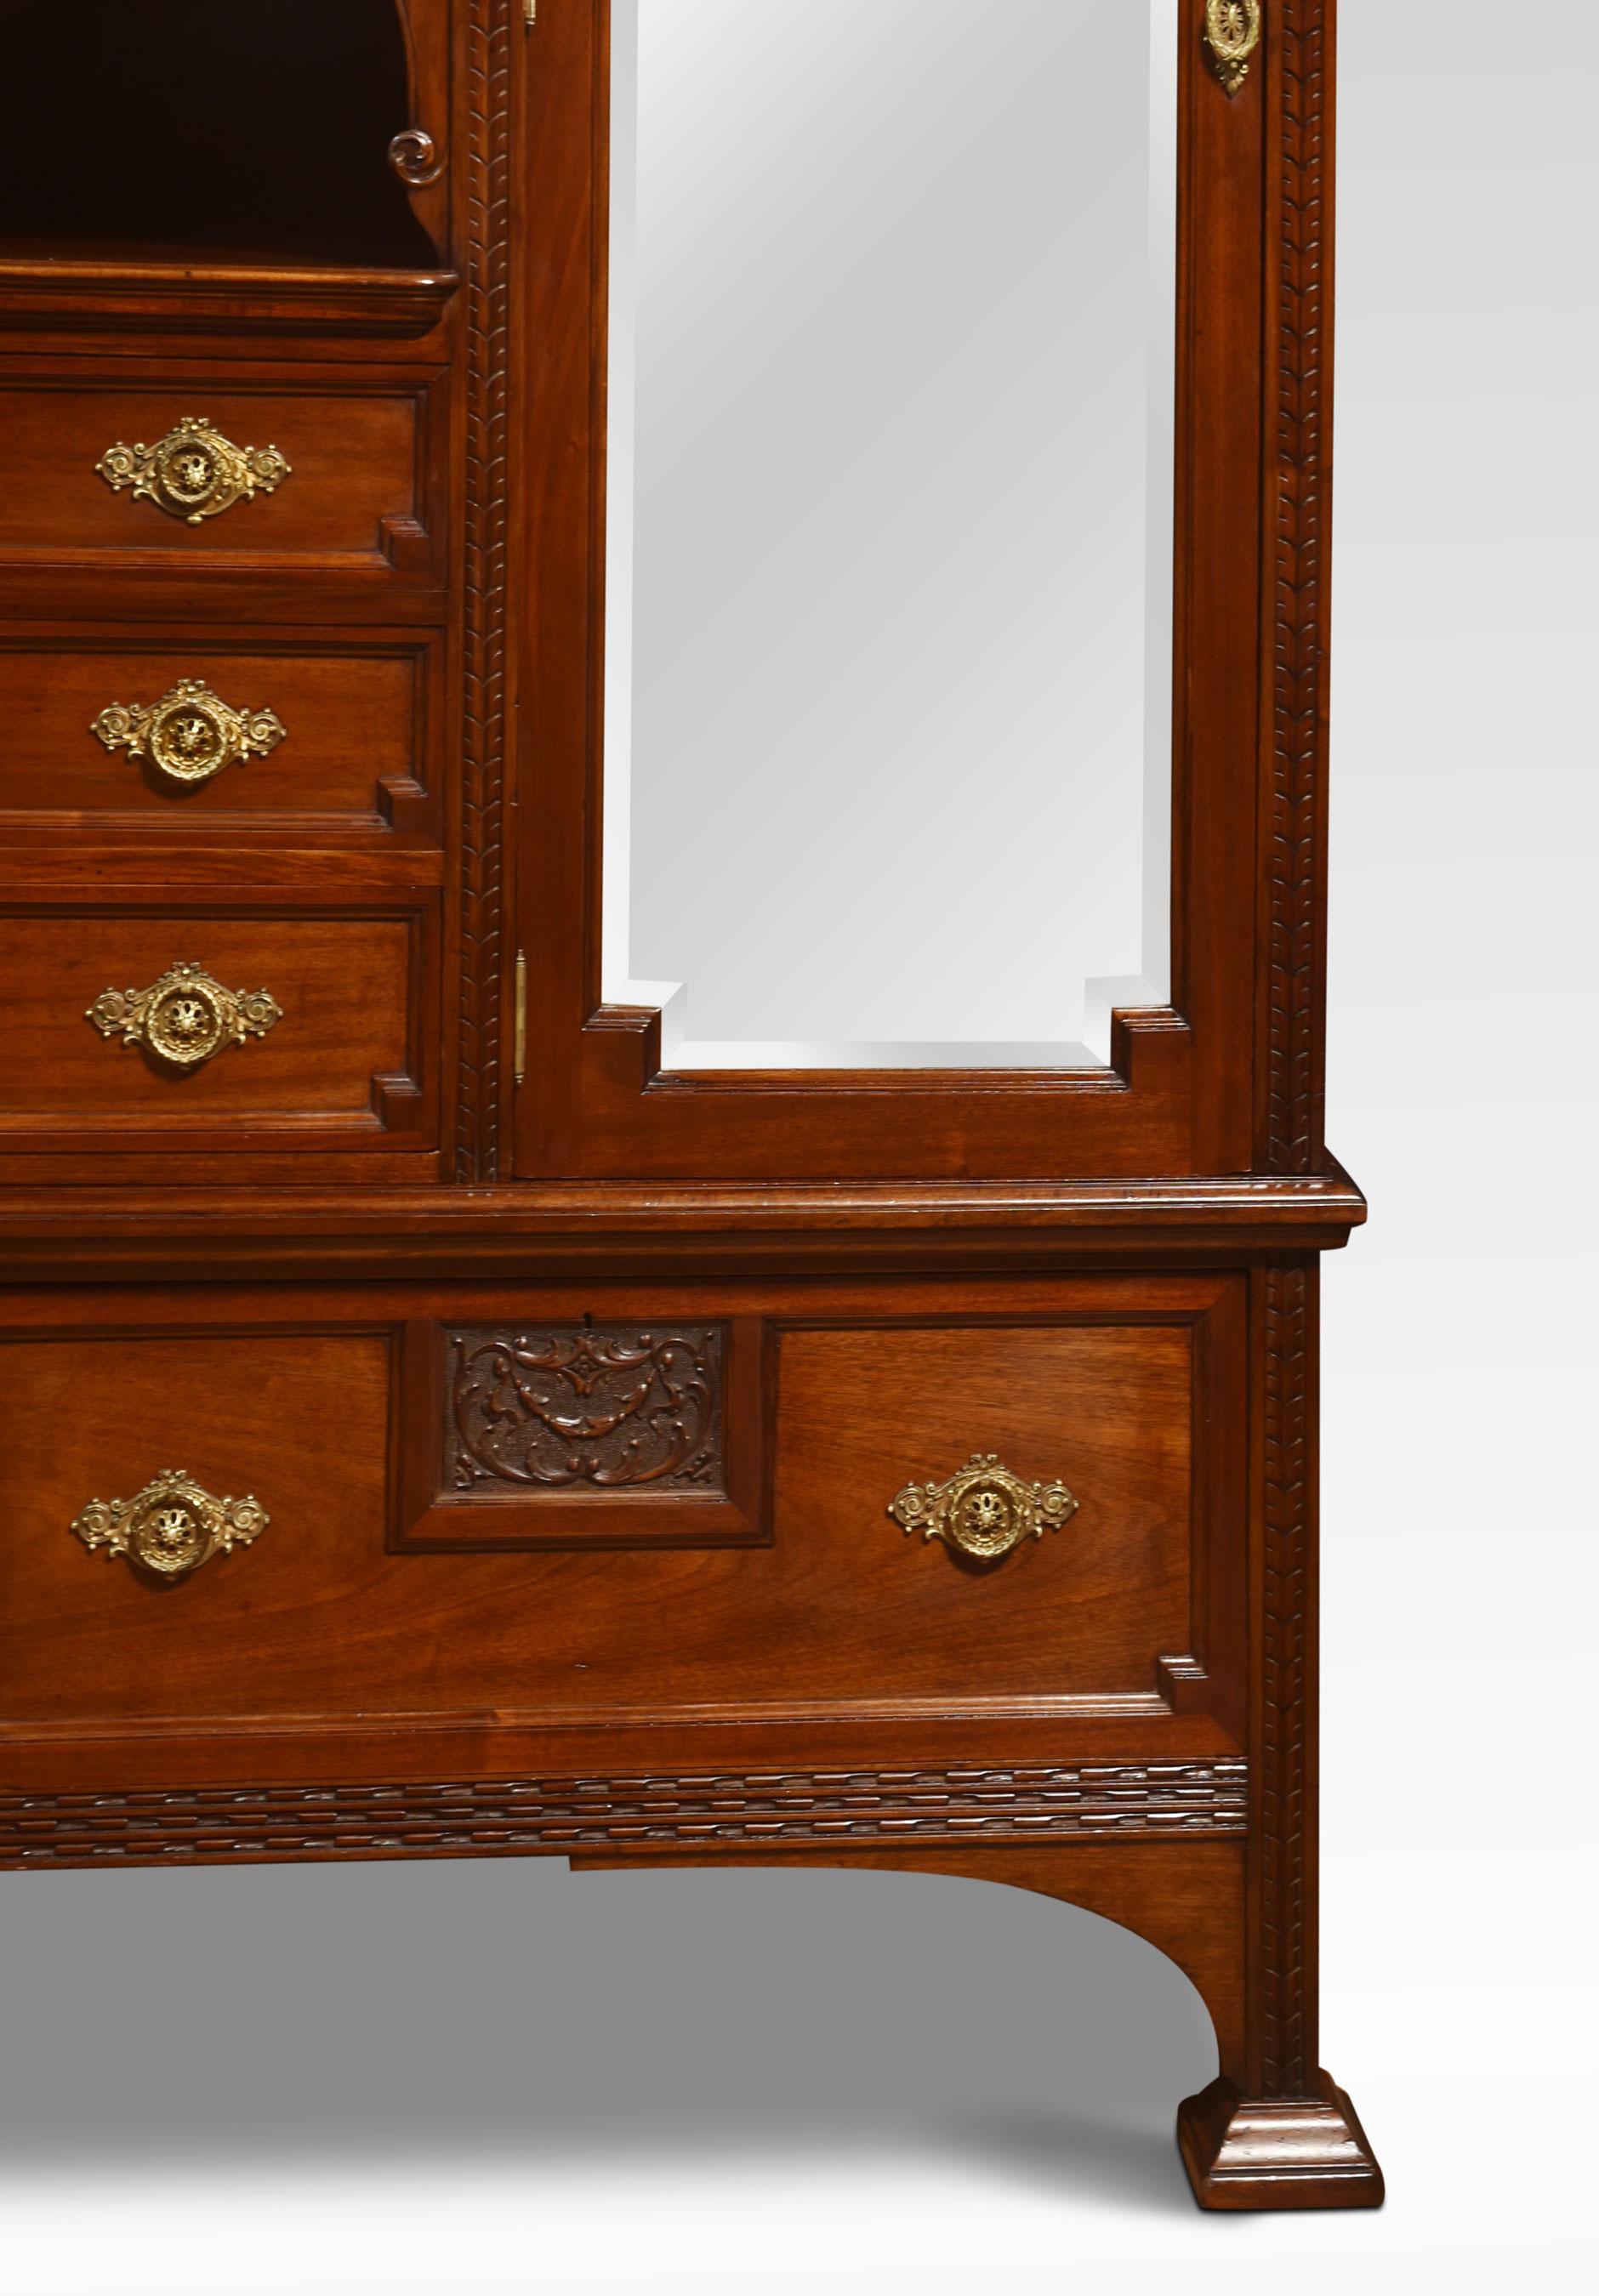 Carved Walnut Compactum Wardrobe In Good Condition For Sale In Cheshire, GB